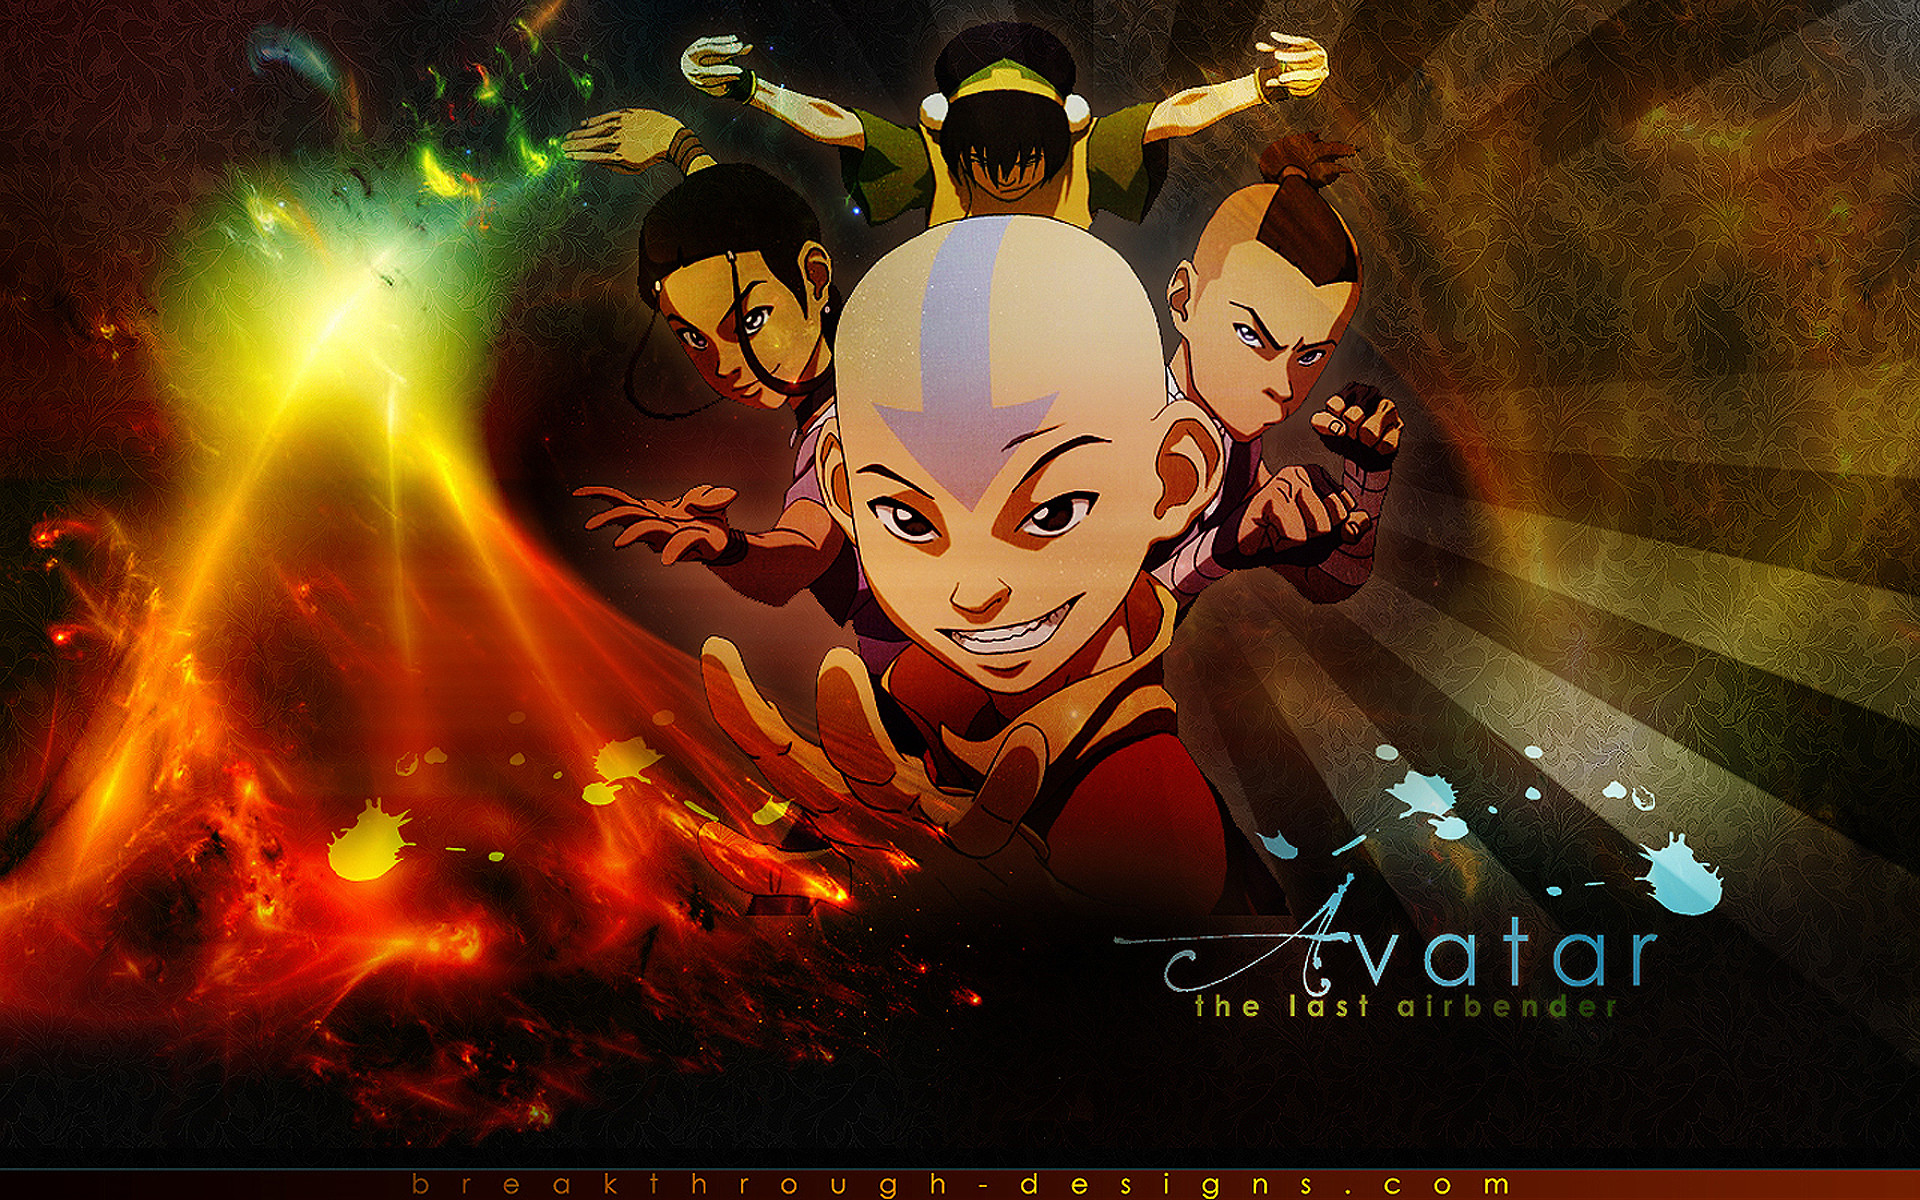 1920x1200 Avatar The Last Airbender hd wallpapers